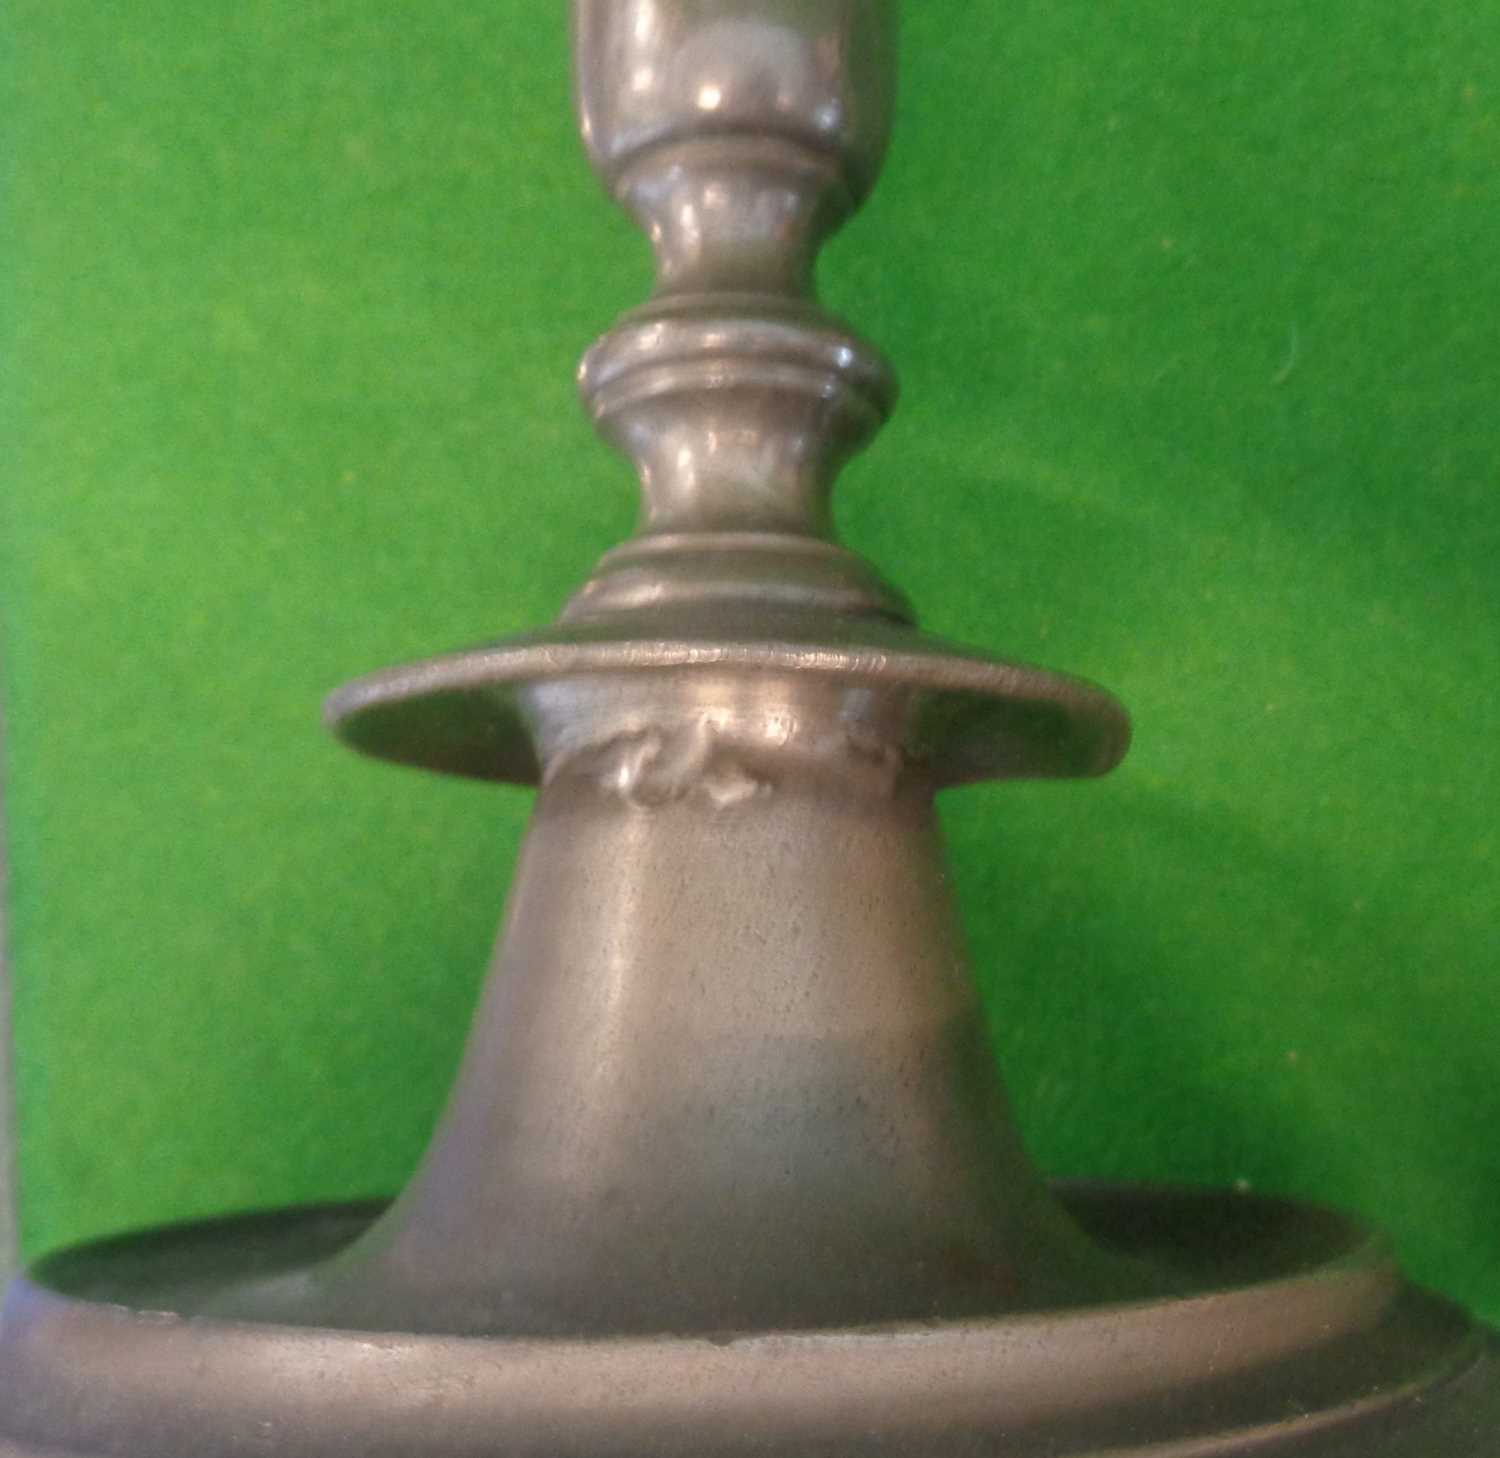 Pair of 18th c. pewter candlesticks with Bristol touchmarks, approx. 24cm high - Image 6 of 8